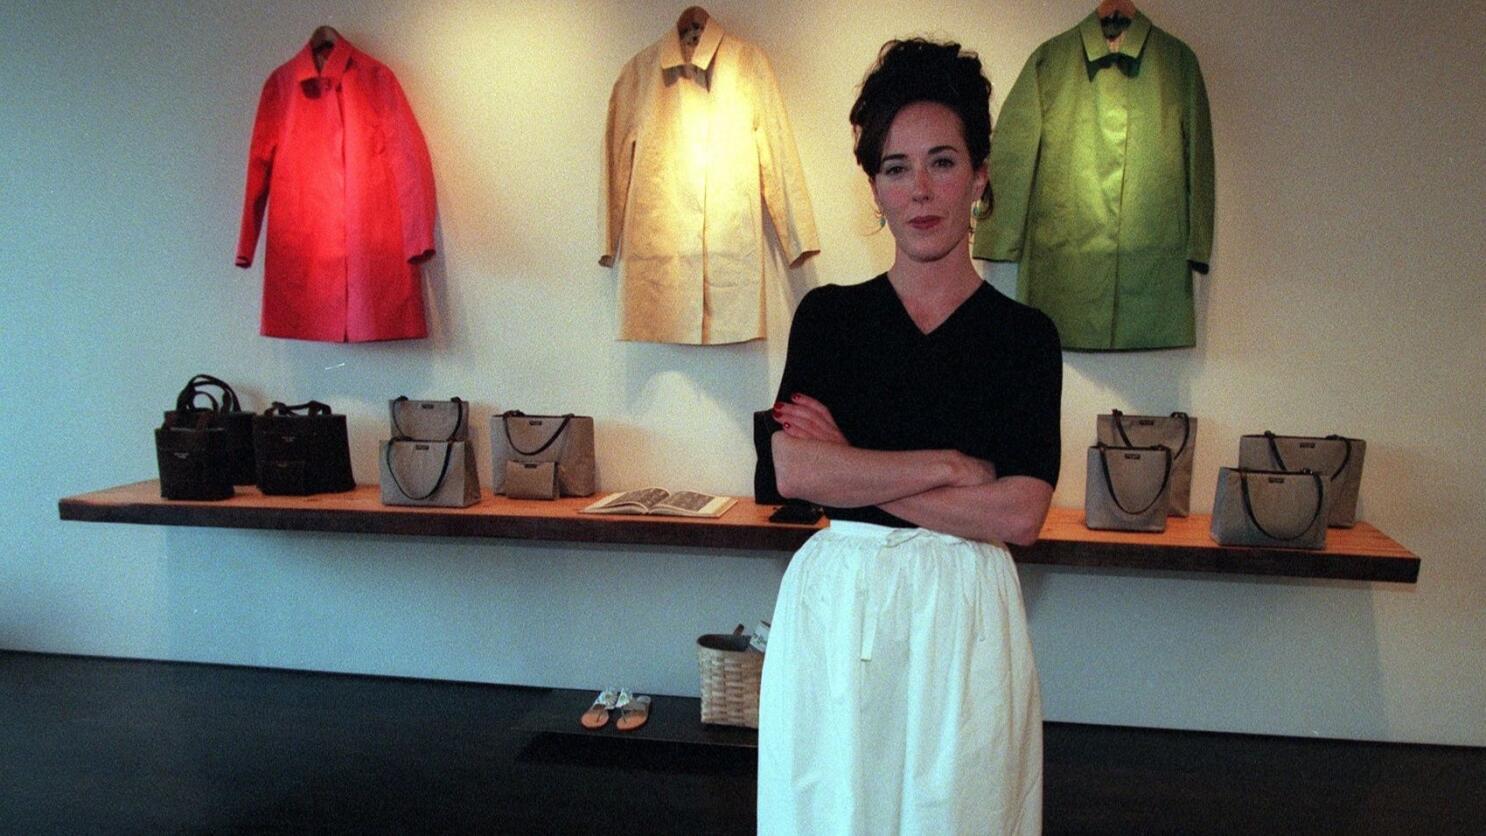 Rest in Peace, Kate Spade